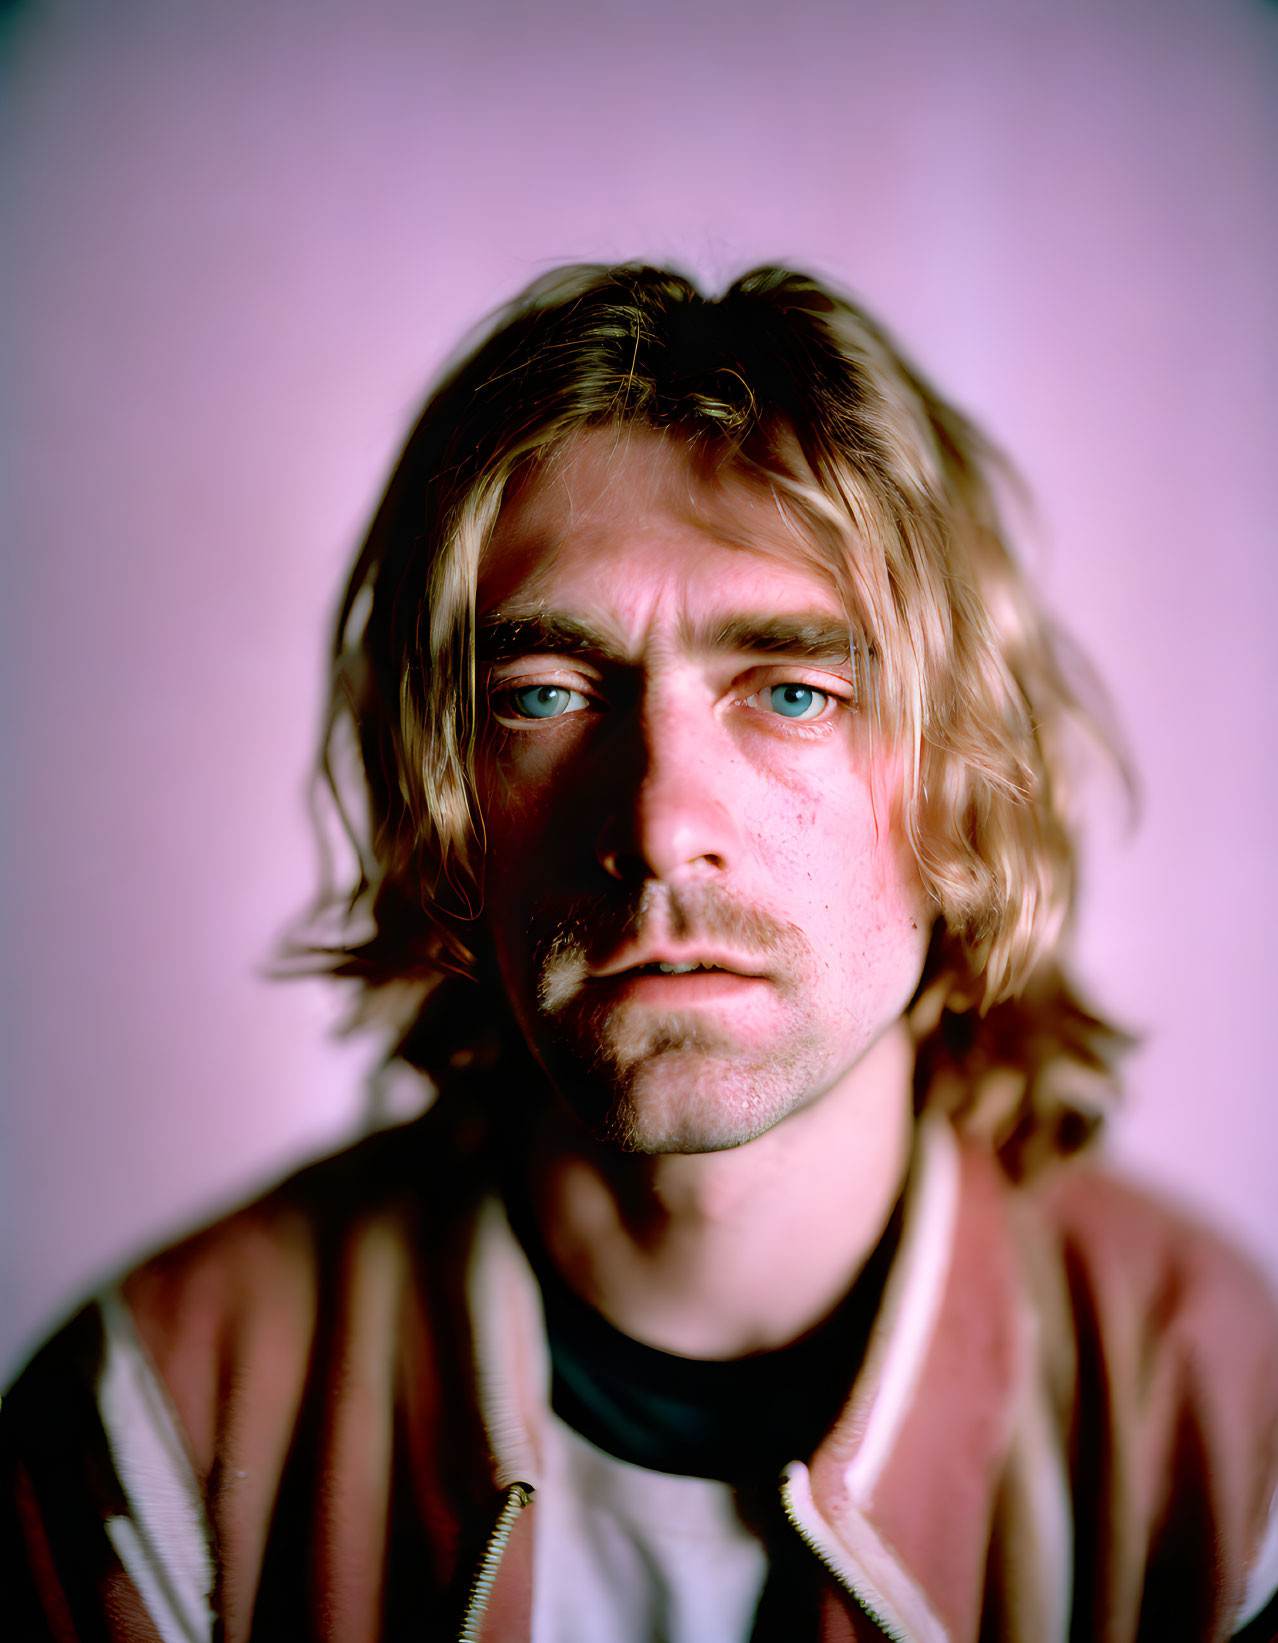 Man with Medium-Length Wavy Blond Hair and Stubble on Pink Background